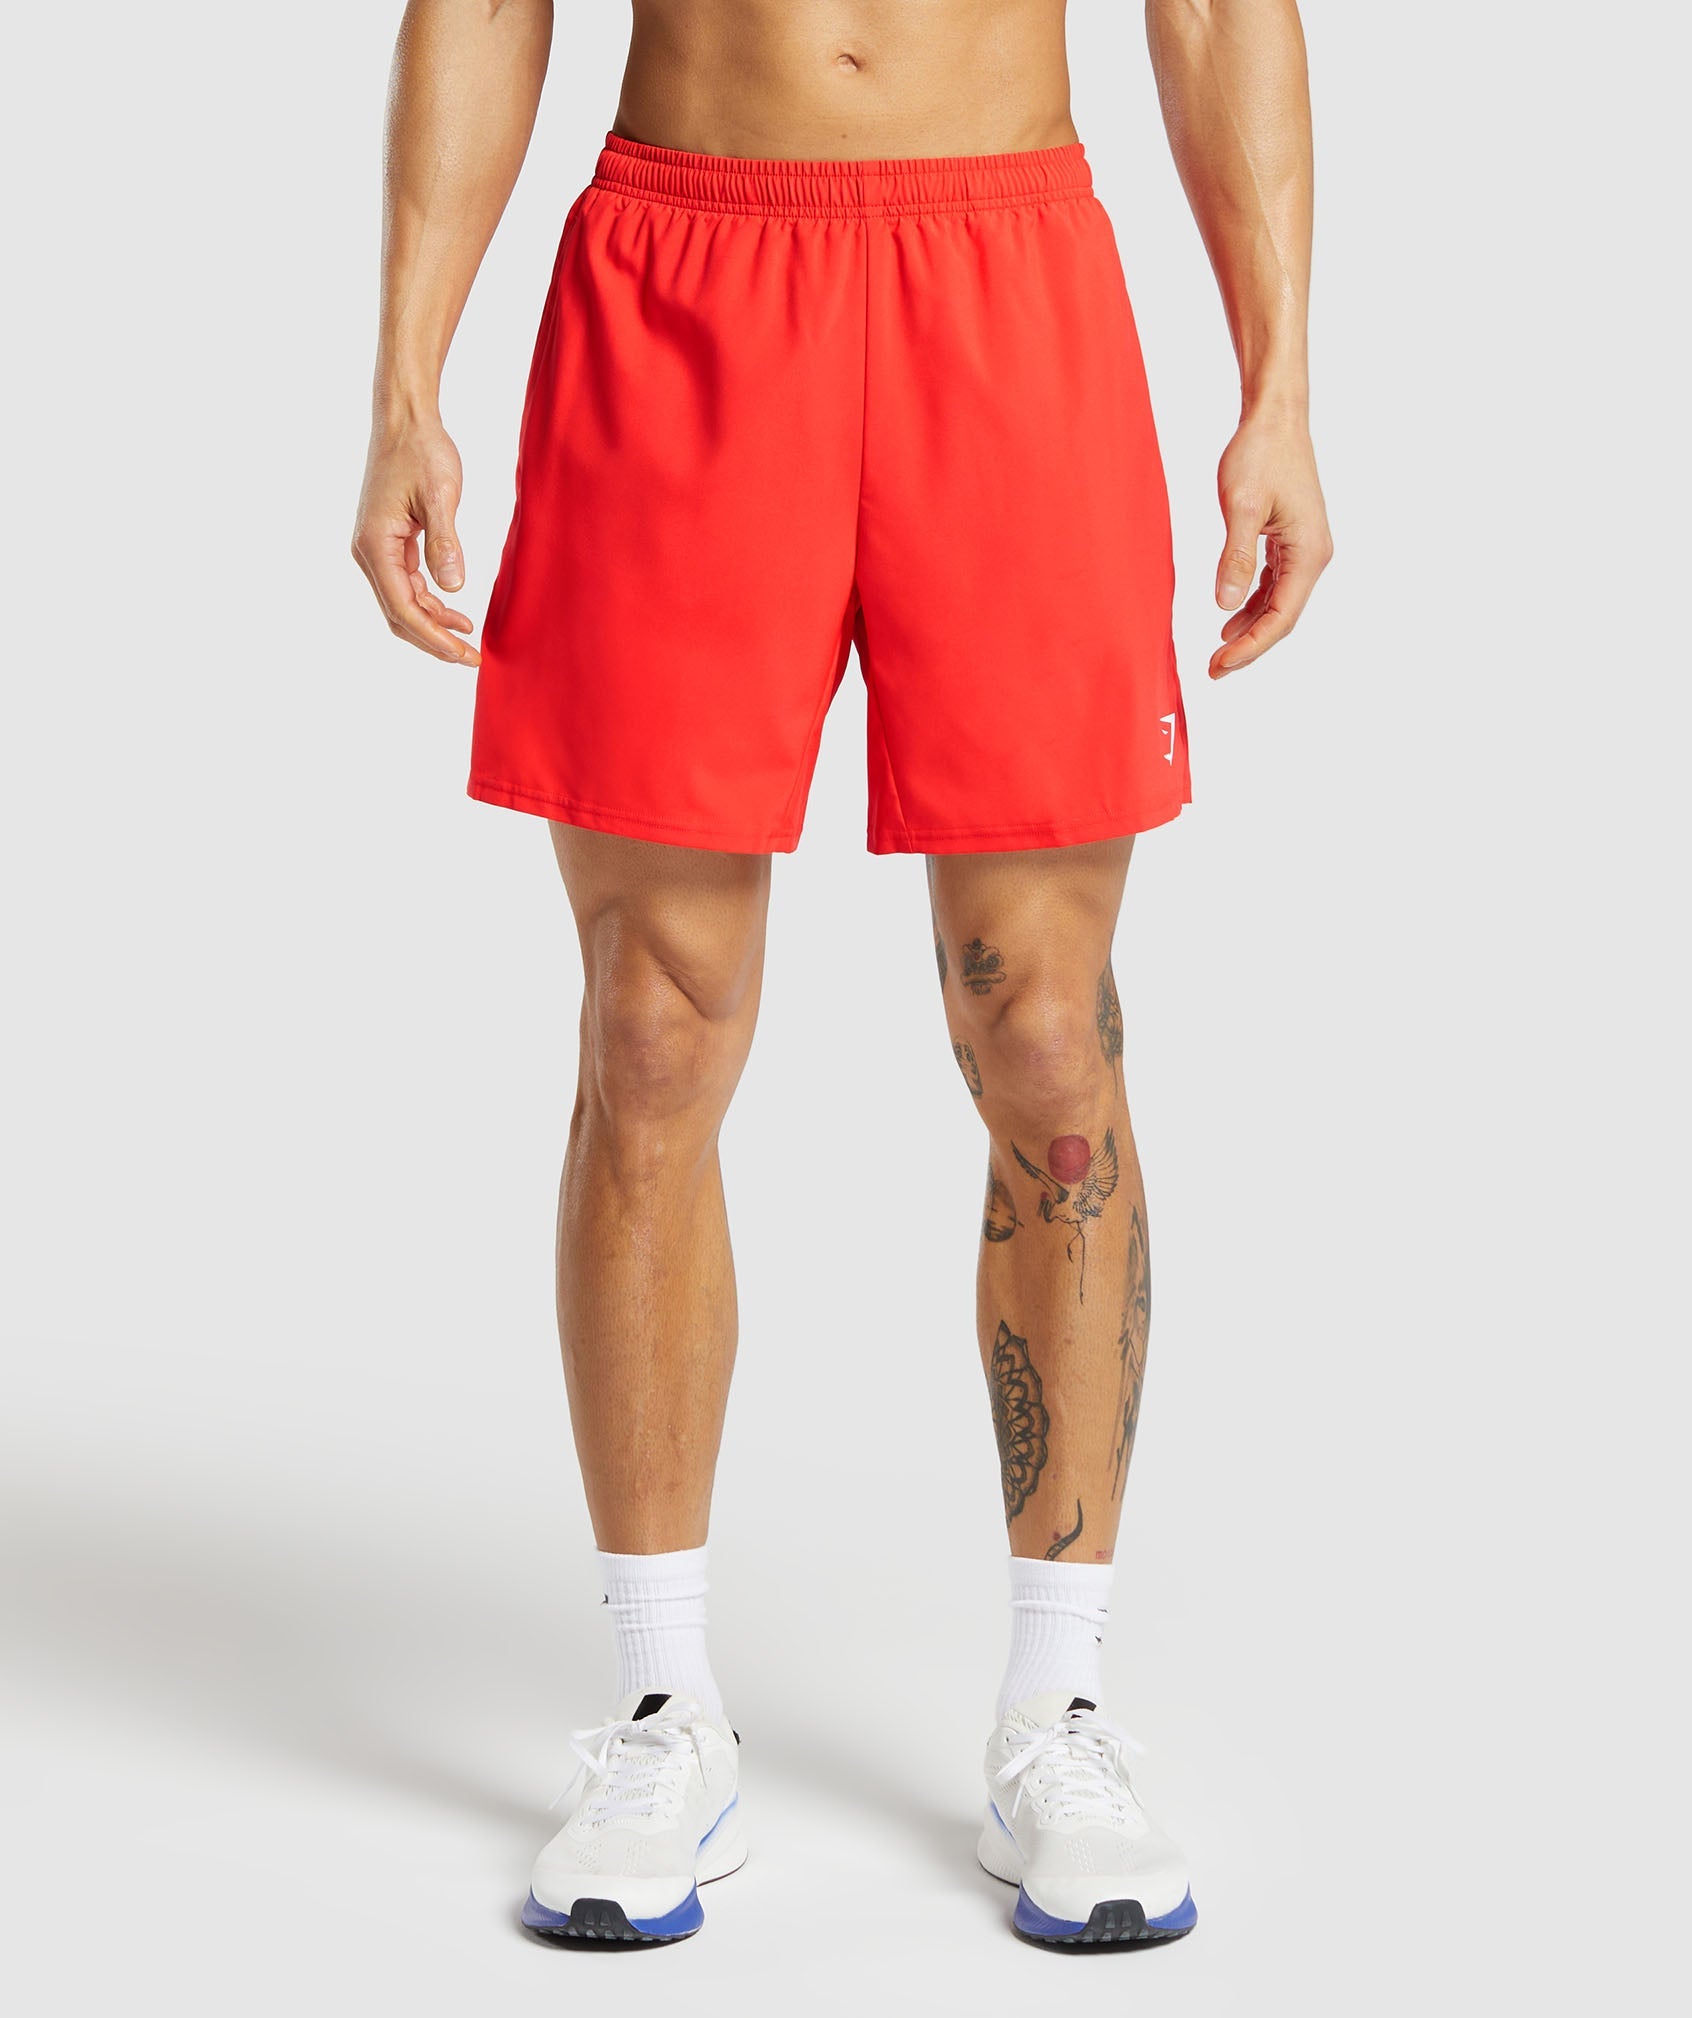 Arrival Shorts in Pow Red